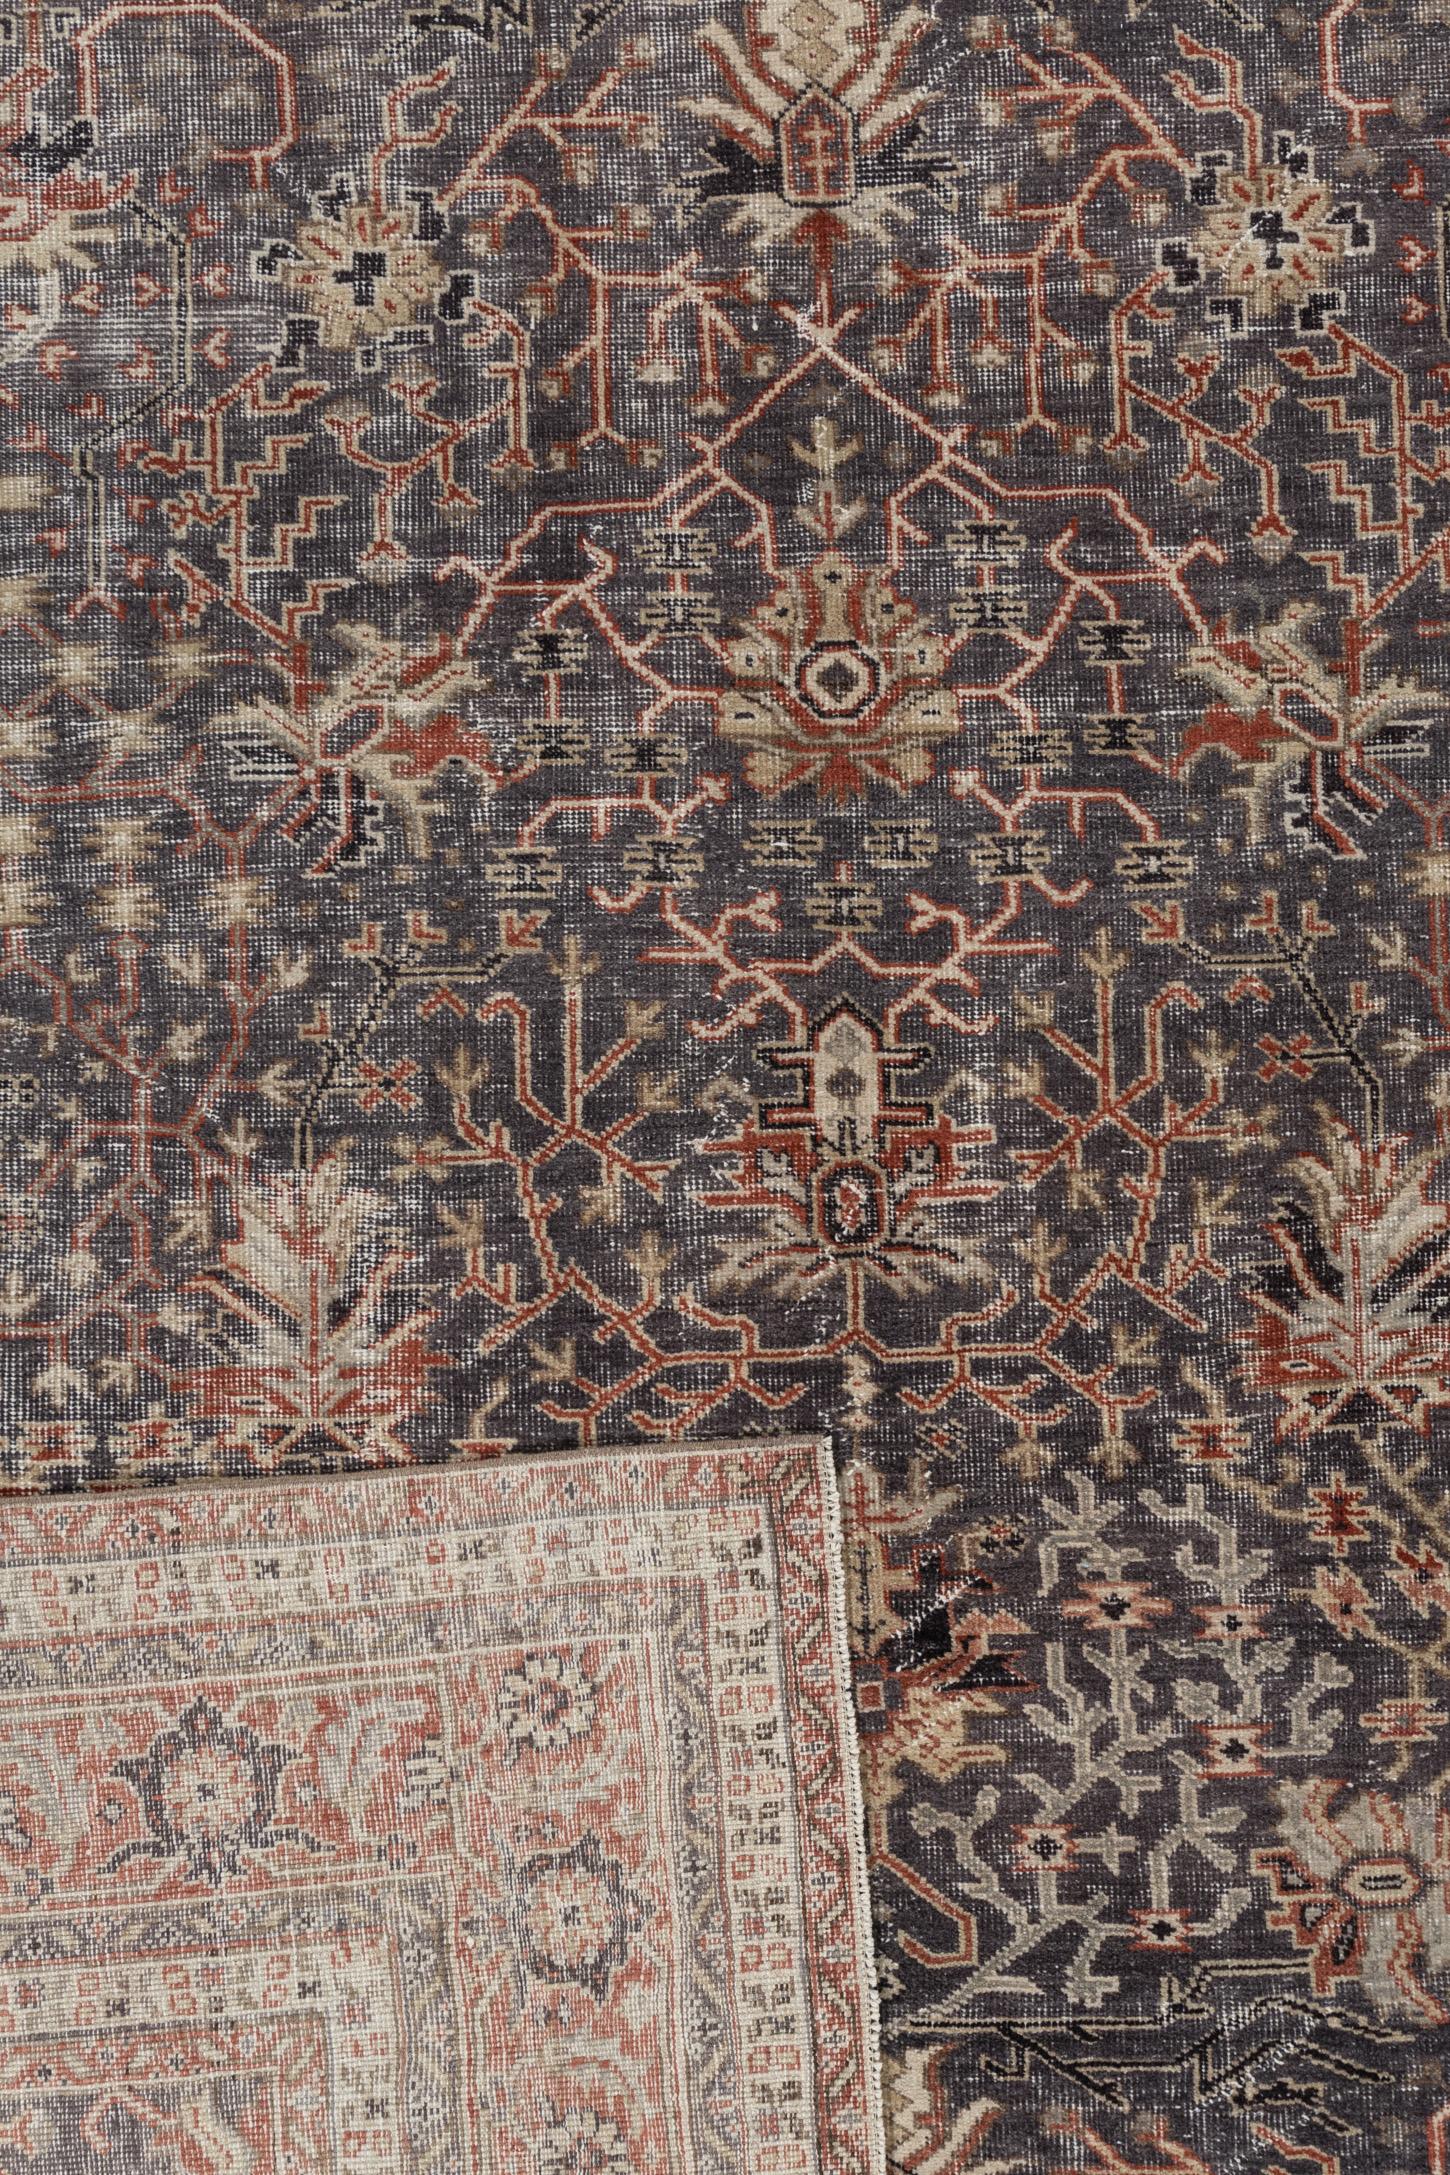 Vintage Turkish Anatolian Area rug 8'8 X 11'2. Hand-woven in Turkey where rug weaving is the culture rather than a business. Rugs from Turkey are known for the high quality of their wool their beautiful patterns and warm colors. These designer